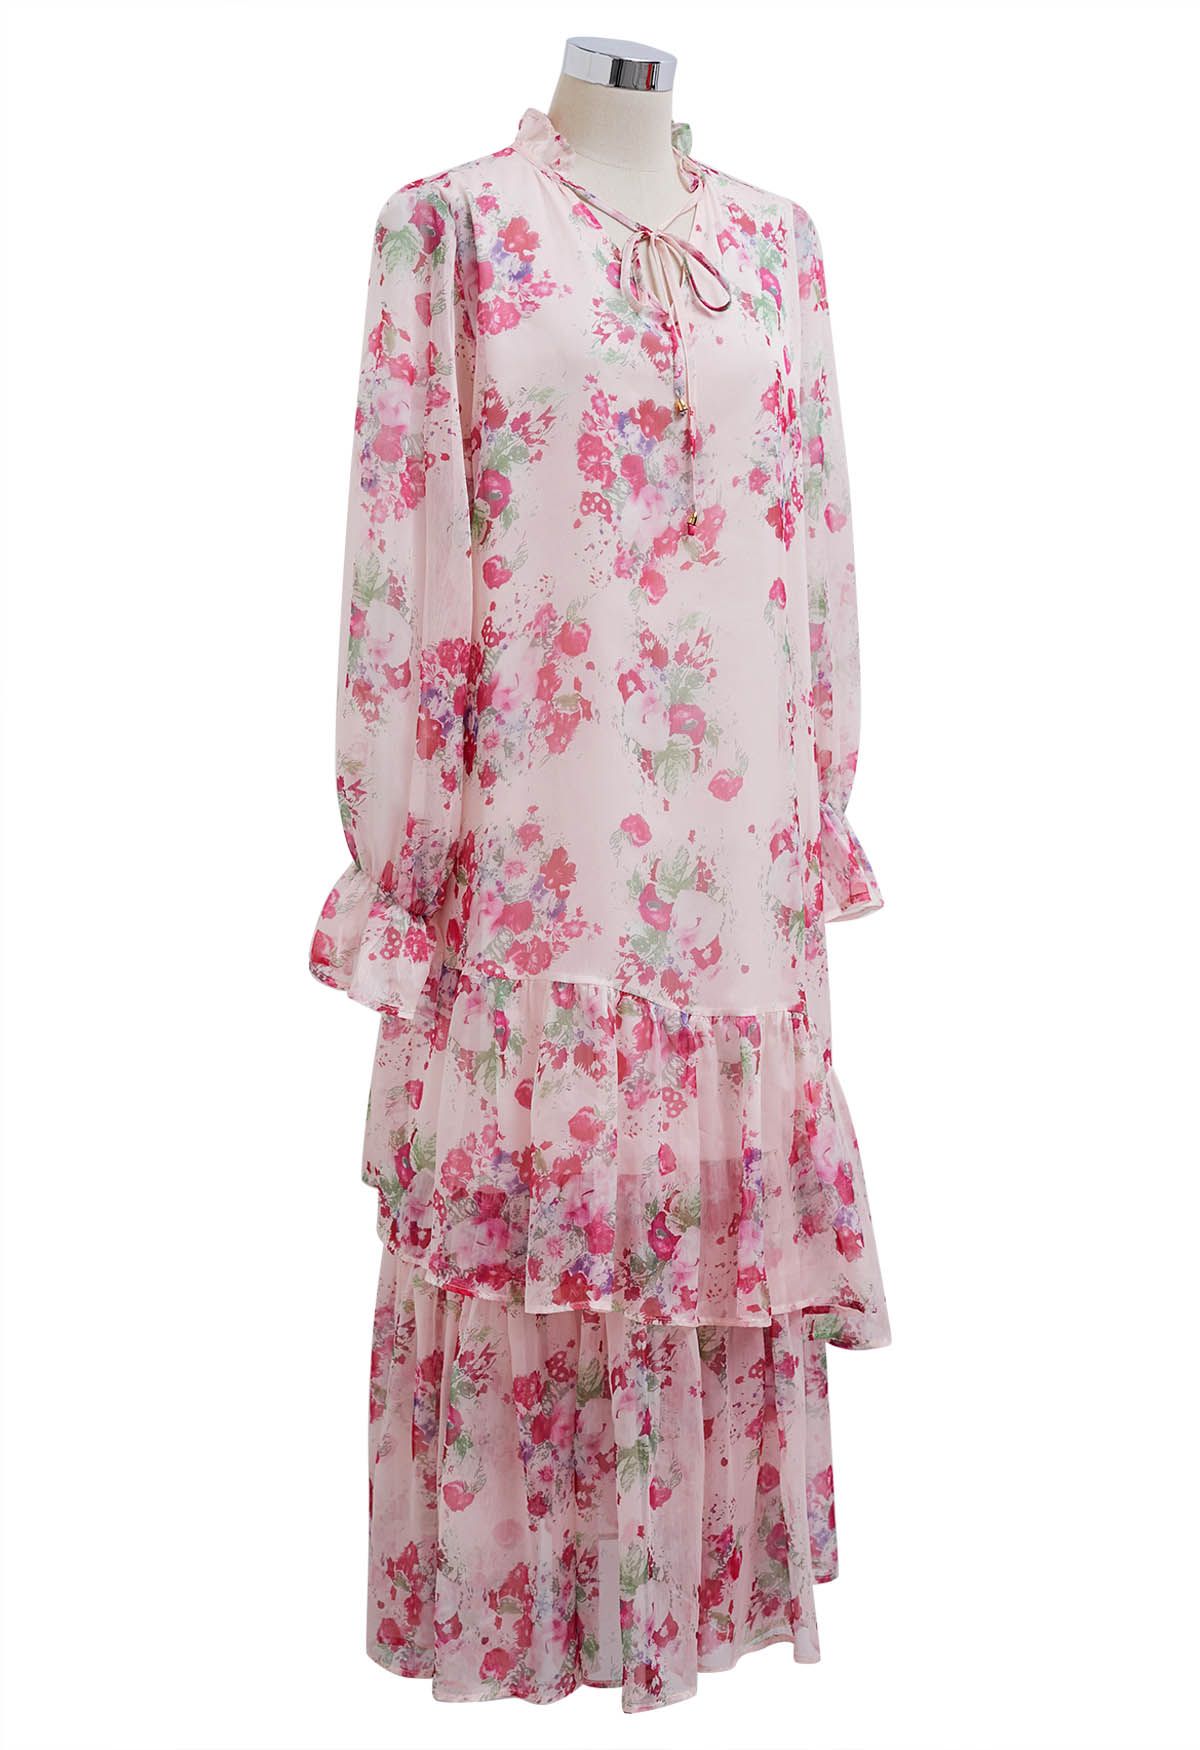 Watercolor Pink Floral Tiered Chiffon Dress